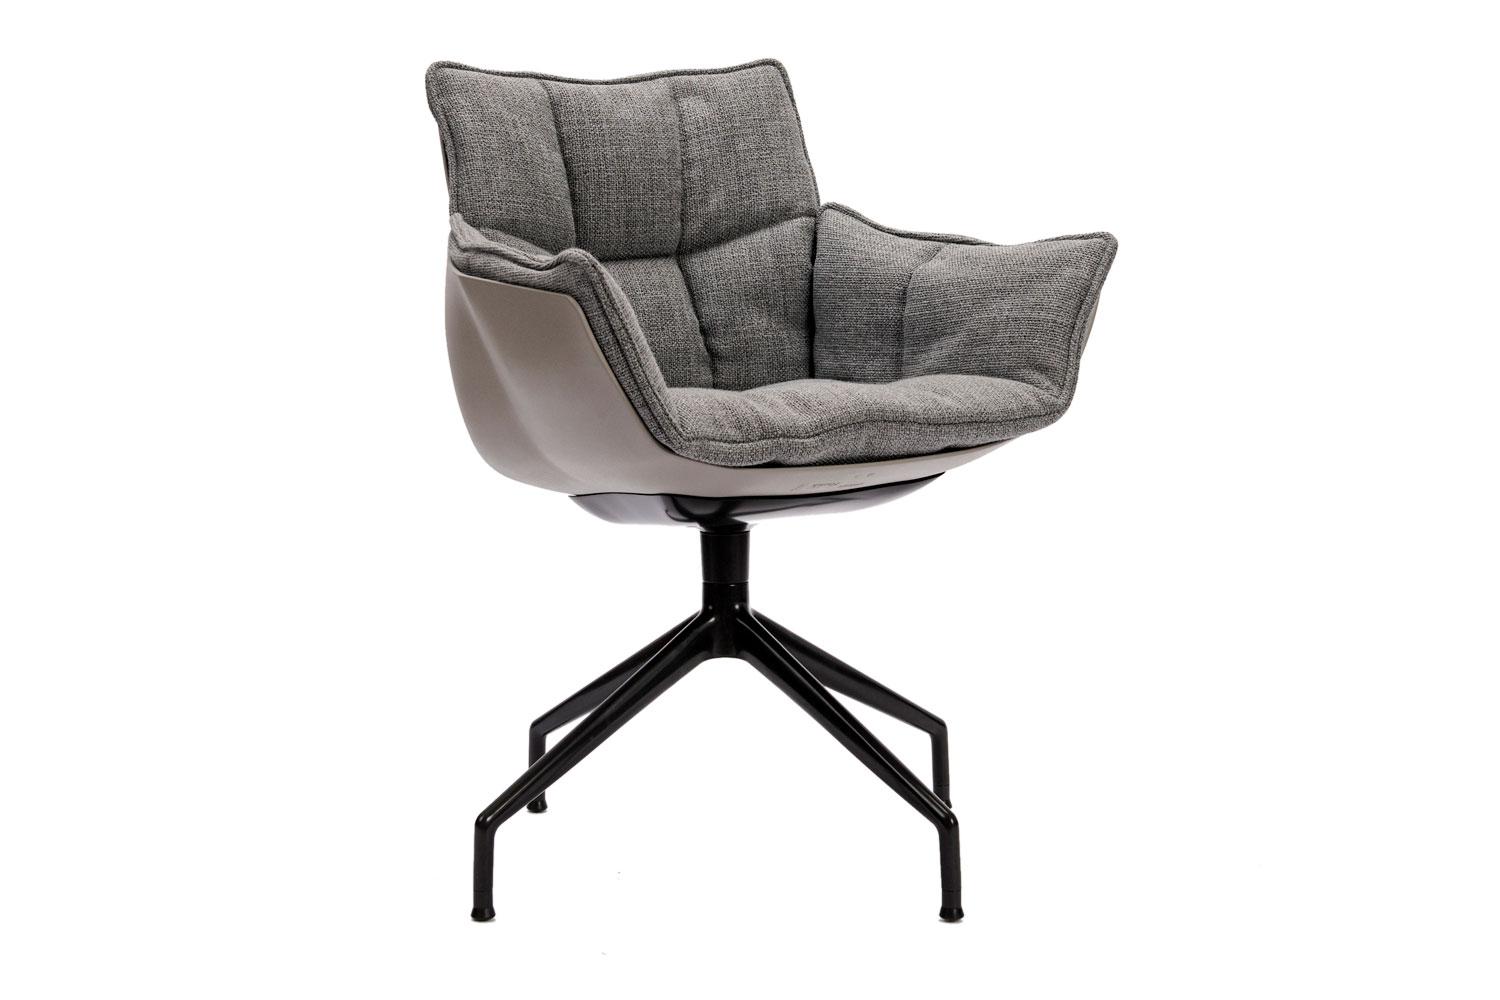 Husk Swivel small chair by B&B Italia

Designed by Patricia Urquiola for B & B Italia this armchair is a modern combination of base and seat and picks up the profile of the namesake armchair. The hard shell exterior, which is shaped with a design